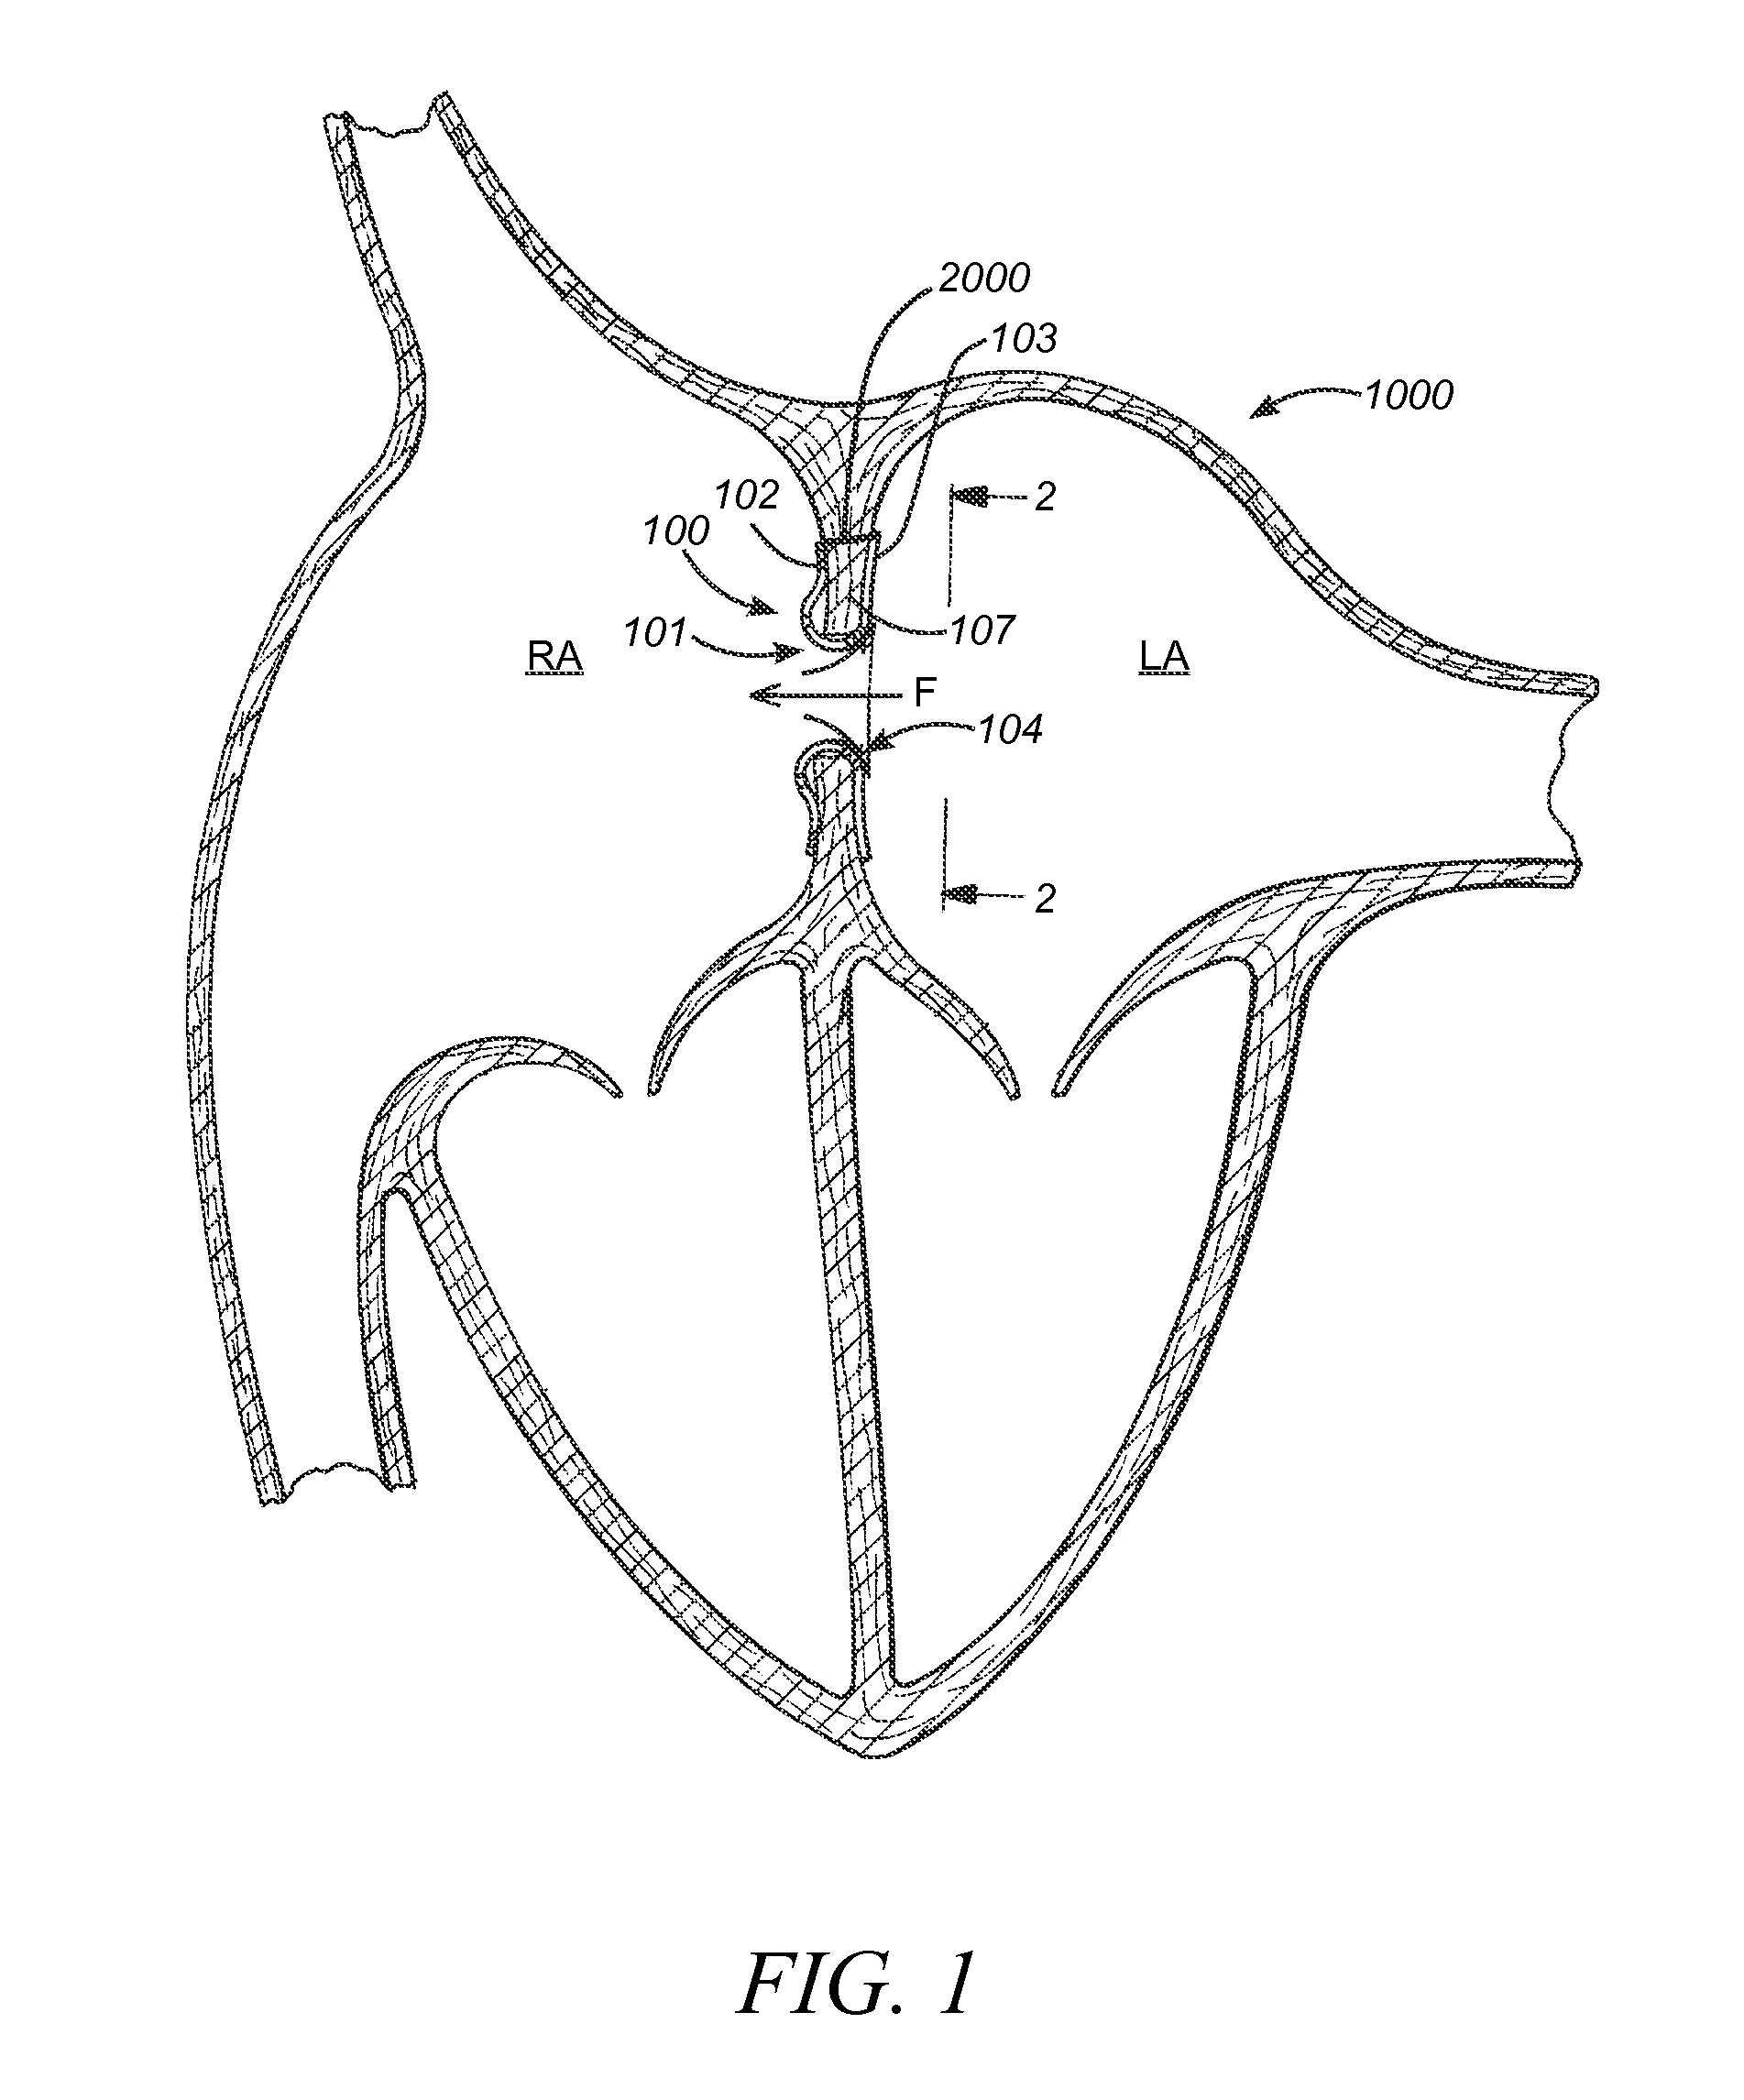 Devices, systems and methods to treat heart failure